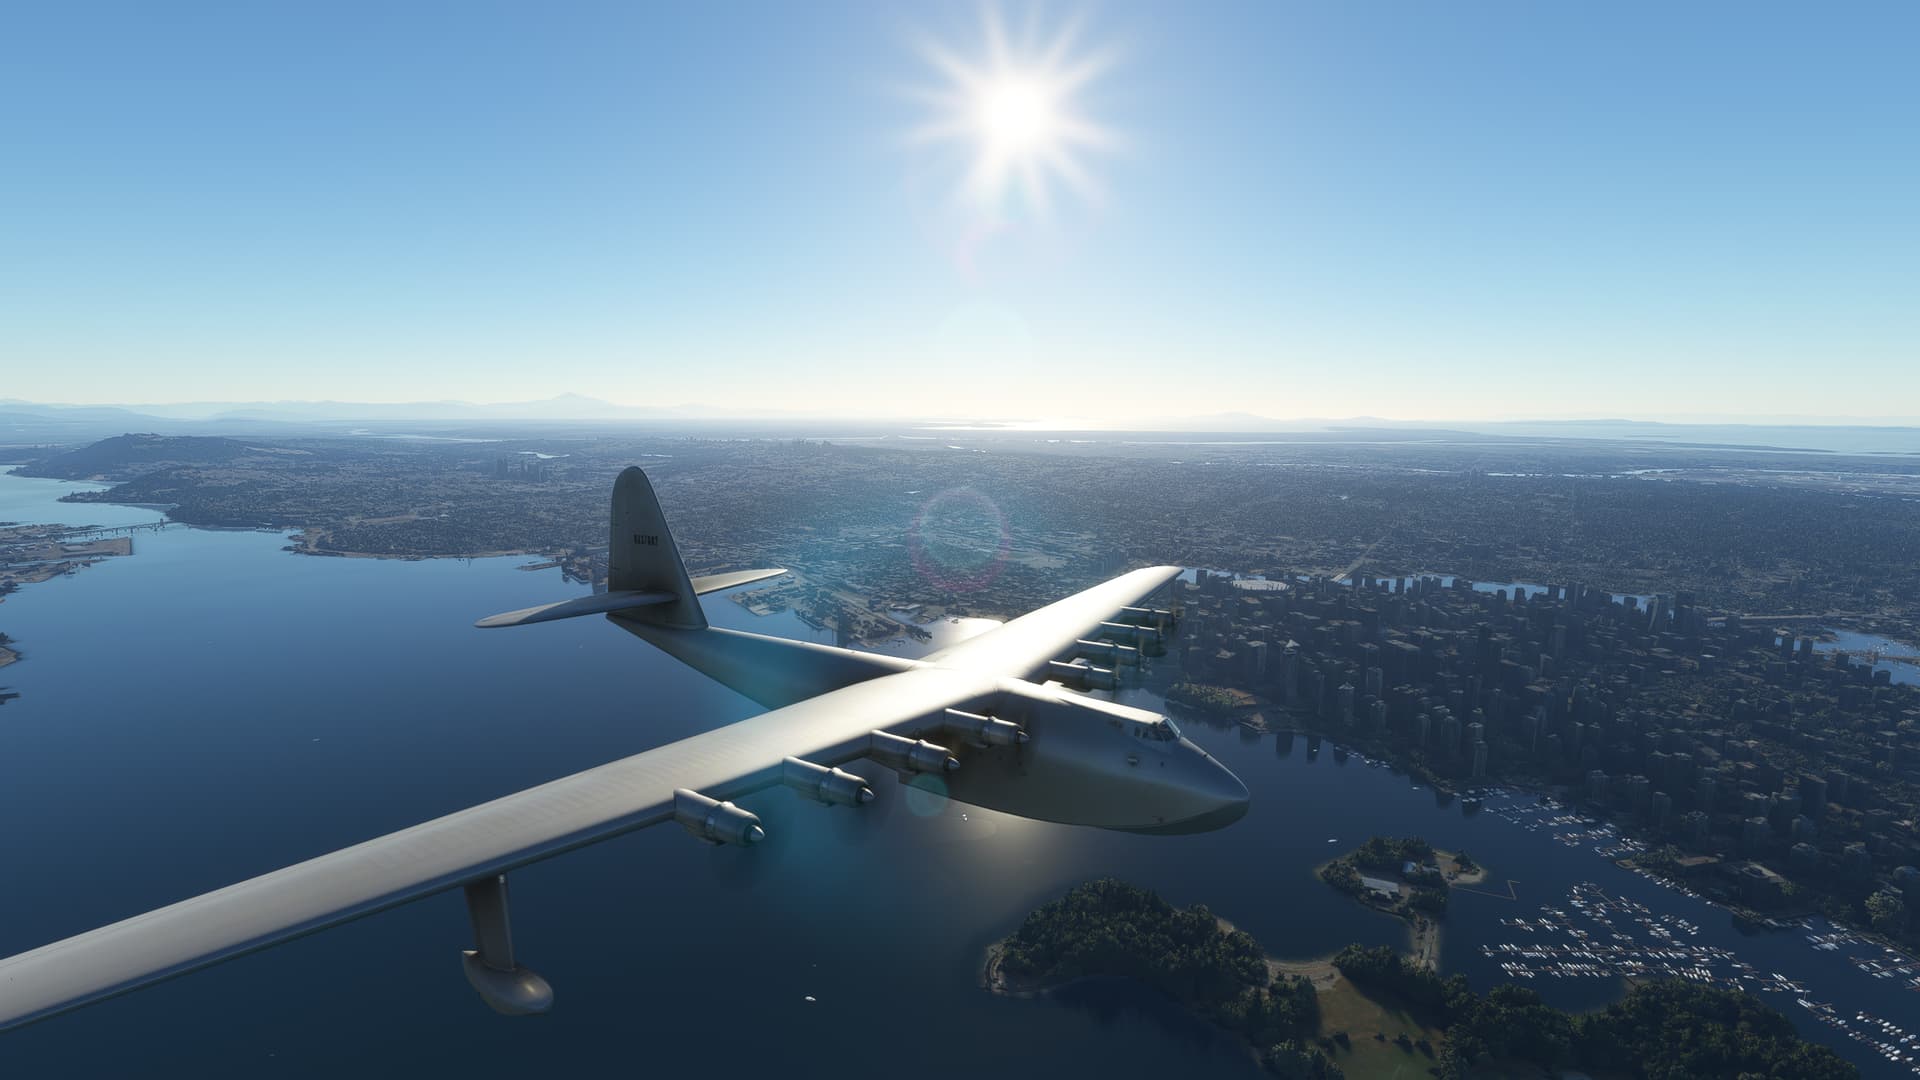 How to Spawn anywhere in the world - Microsoft Flight Simulator 2020